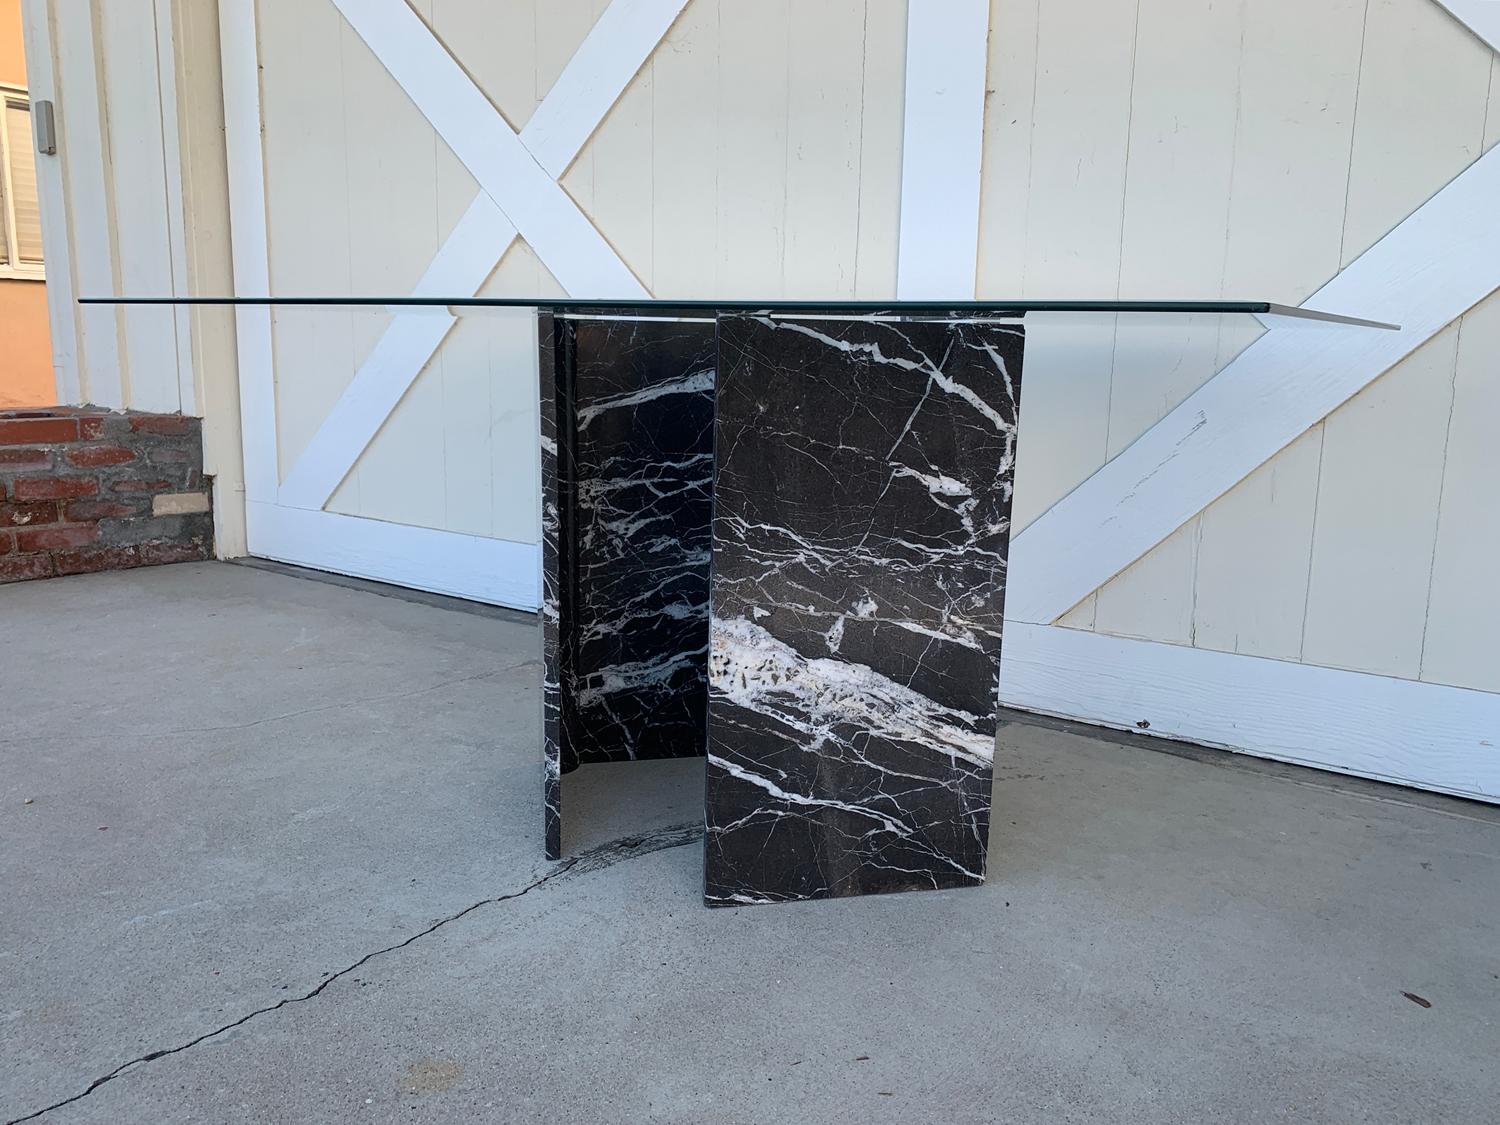 Beautiful dining table with 2 black Calacatta marble pedestals and a glass top.
The piece shows very well, the pedestals can be moved further away or closer together or change the direction they face, they can even be used as a cosole table with a